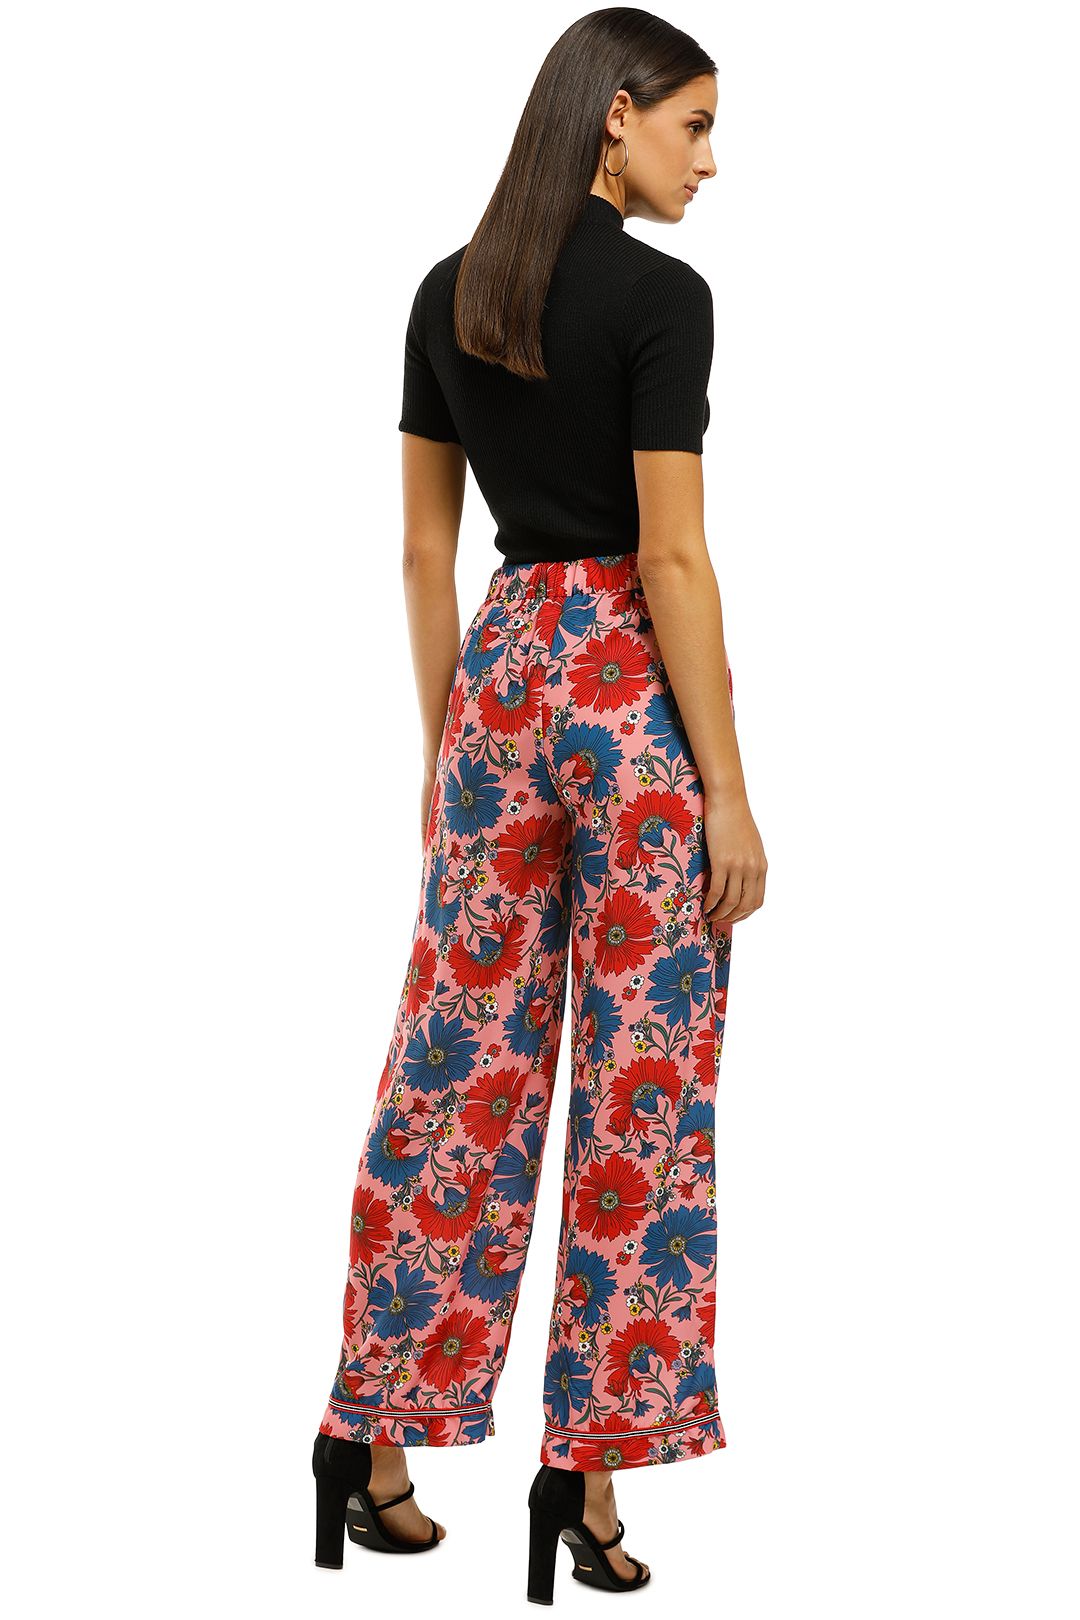 Curate-by-Trelise-Cooper-Pants-Down-Pant-Pink-Back